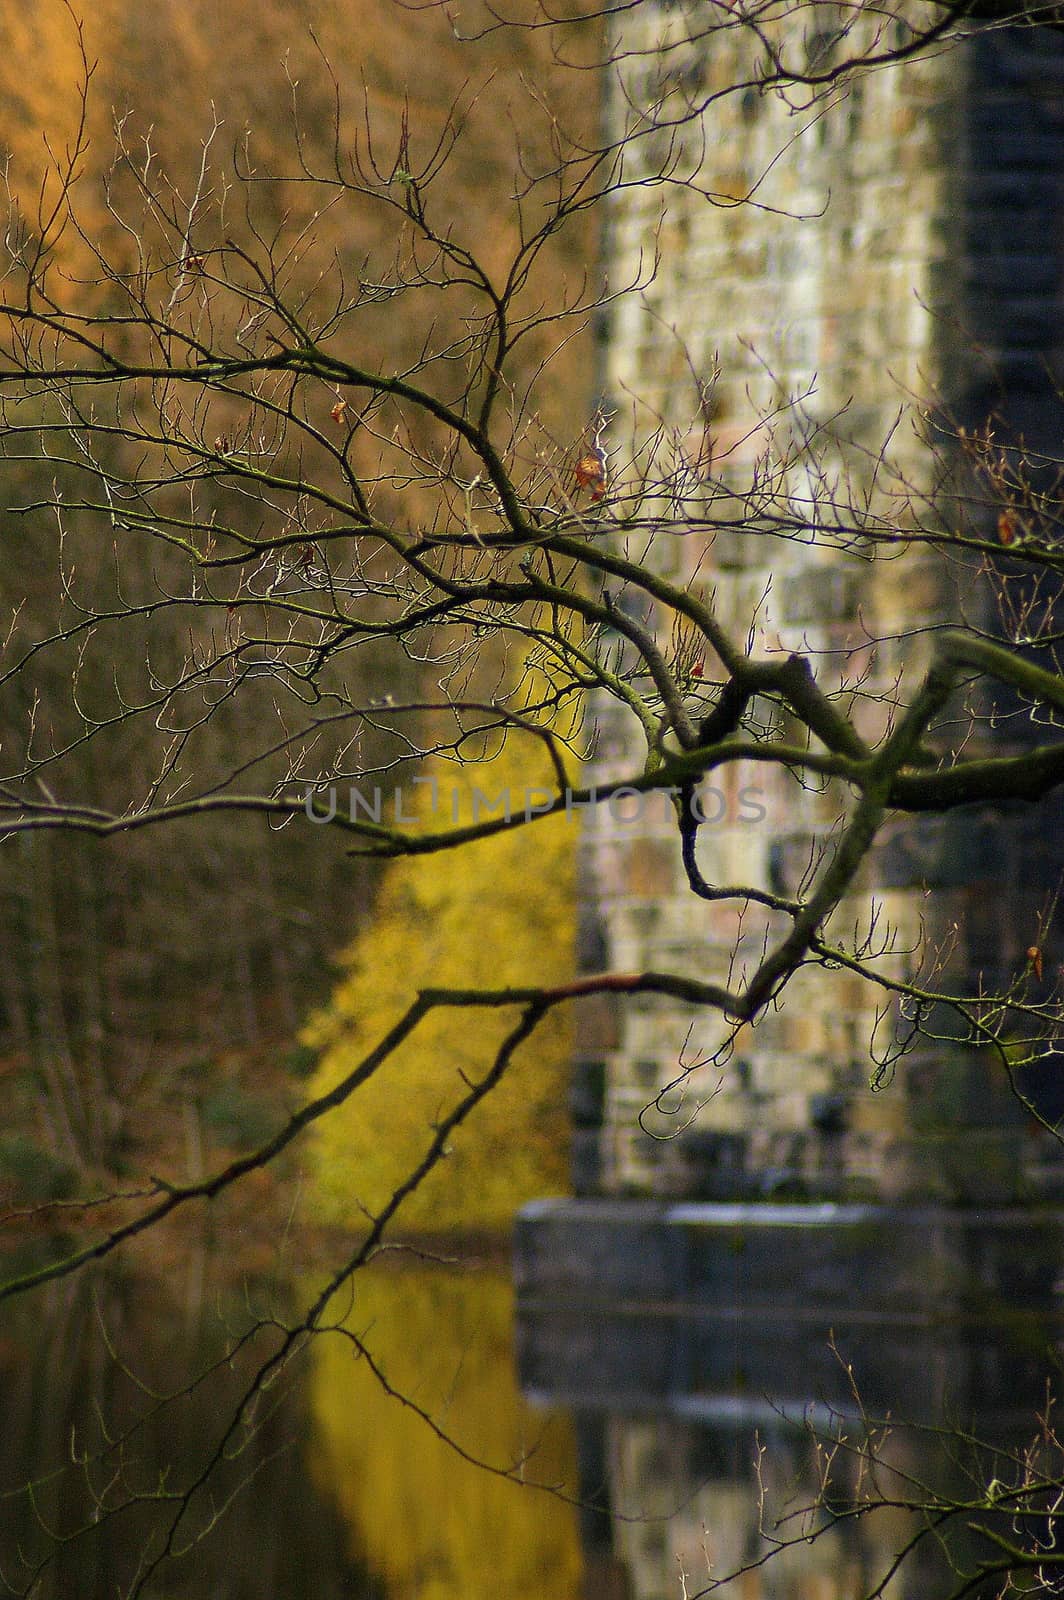 Bare, spidery tree branch by the side of a reservoir with the foot of a railway aqueduct arch in the background